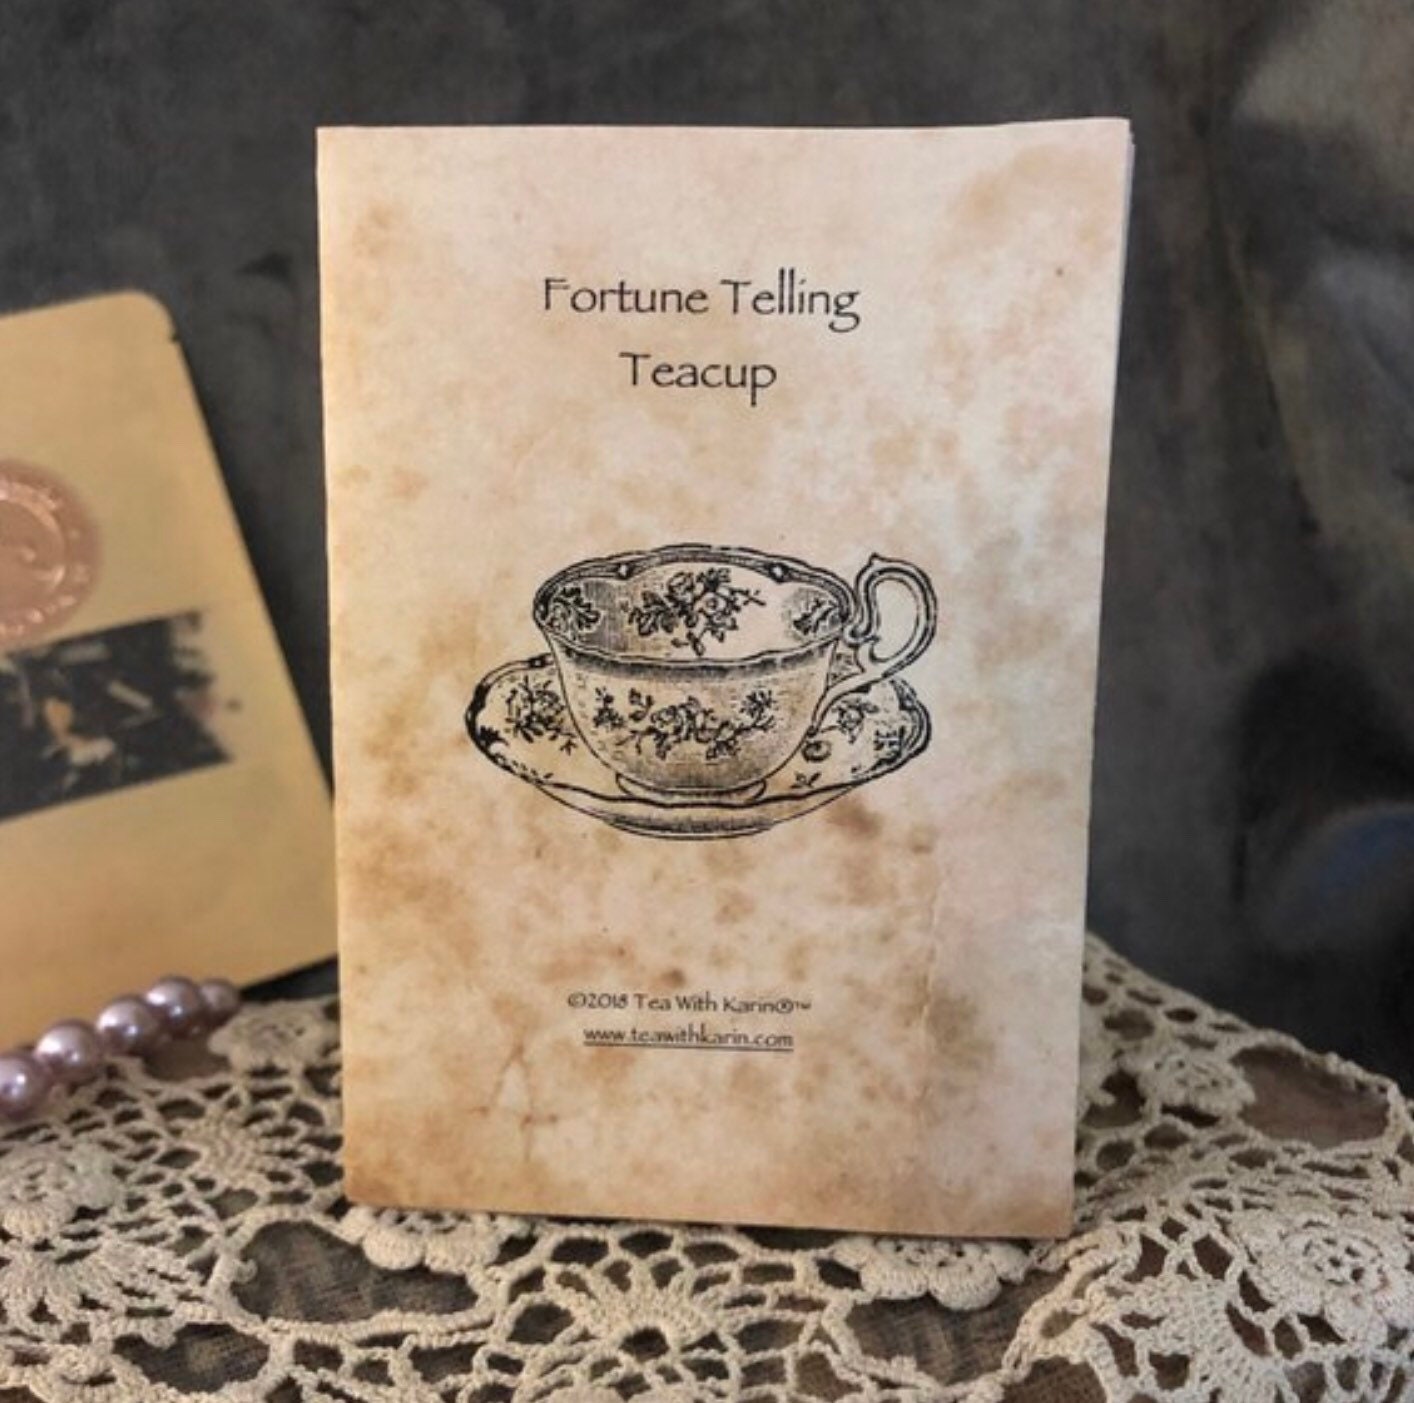 Leopard print Tea cup and saucer set gift fortune telling teacup tarot tea party divination gift for female birthday mom witch Bridal party